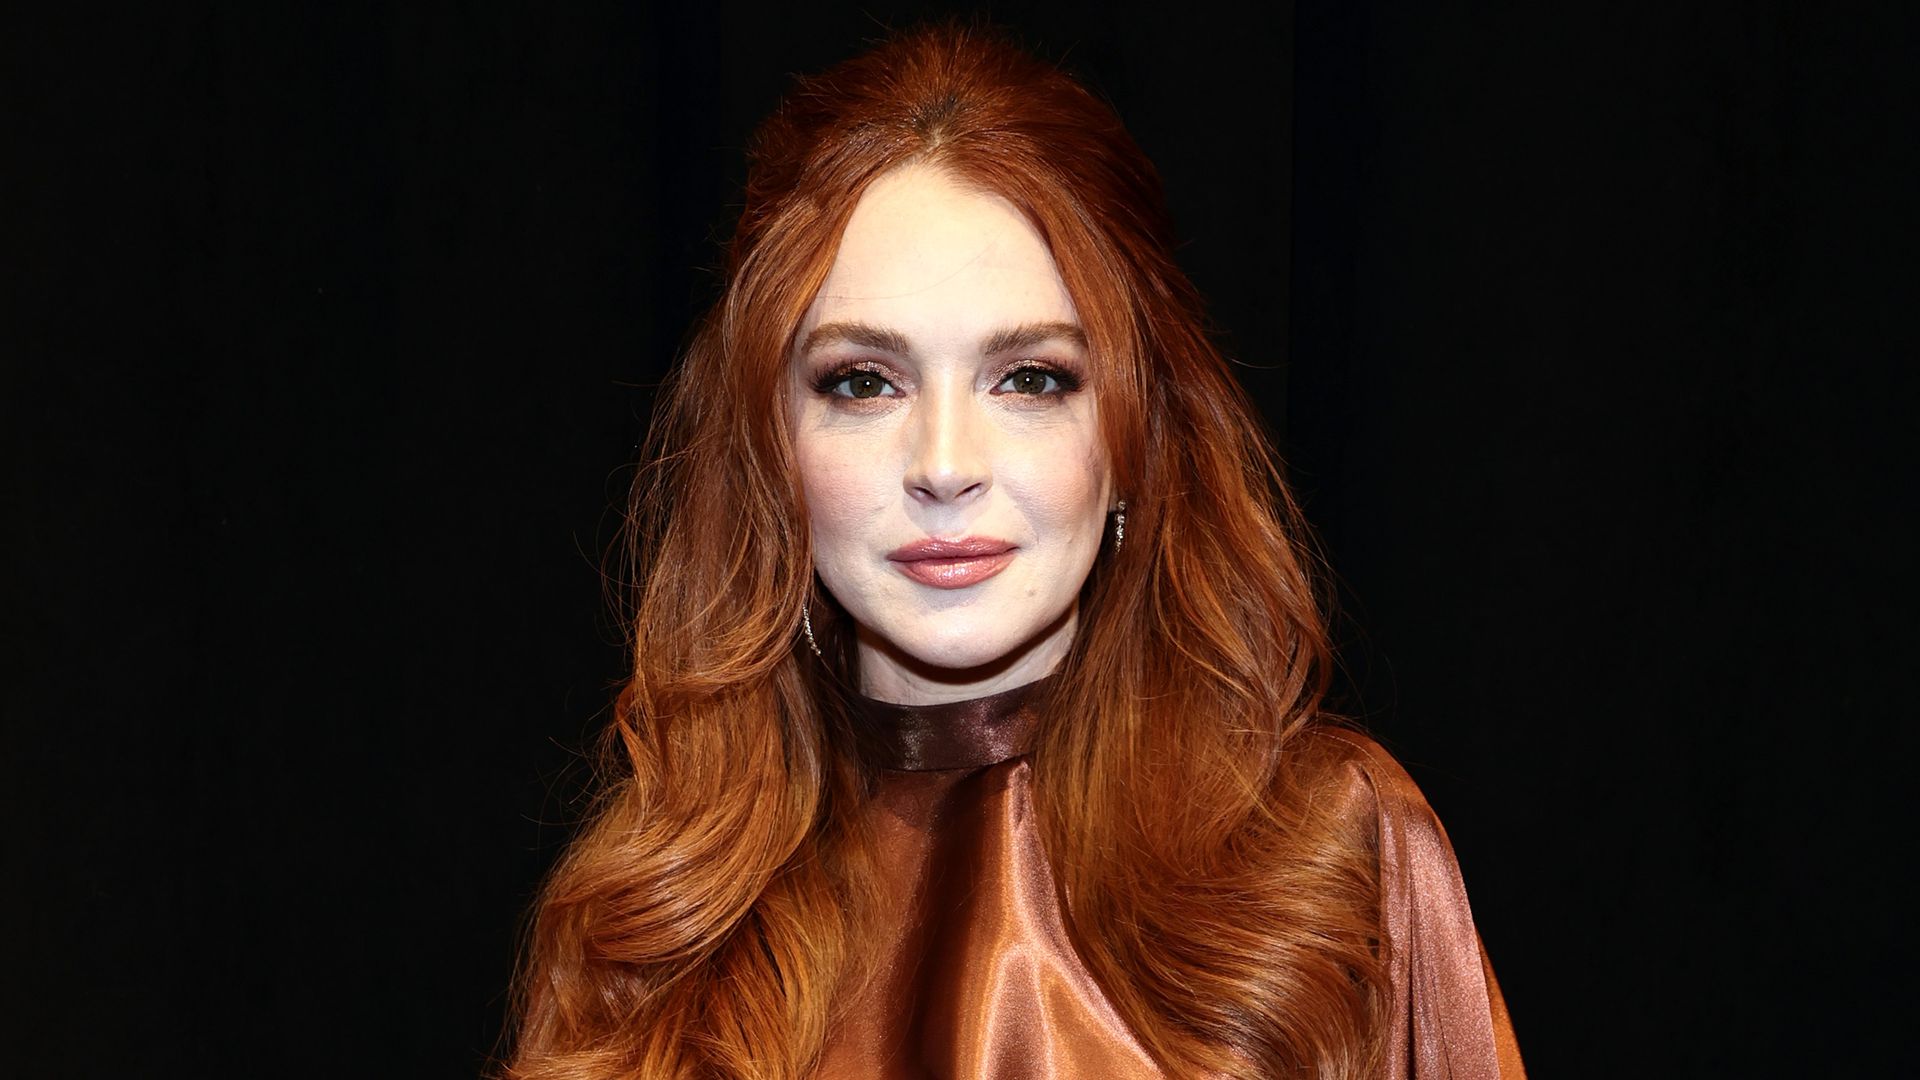 Lindsay Lohan transforms into a glamorous mom-to-be in stunning new photos you have to see